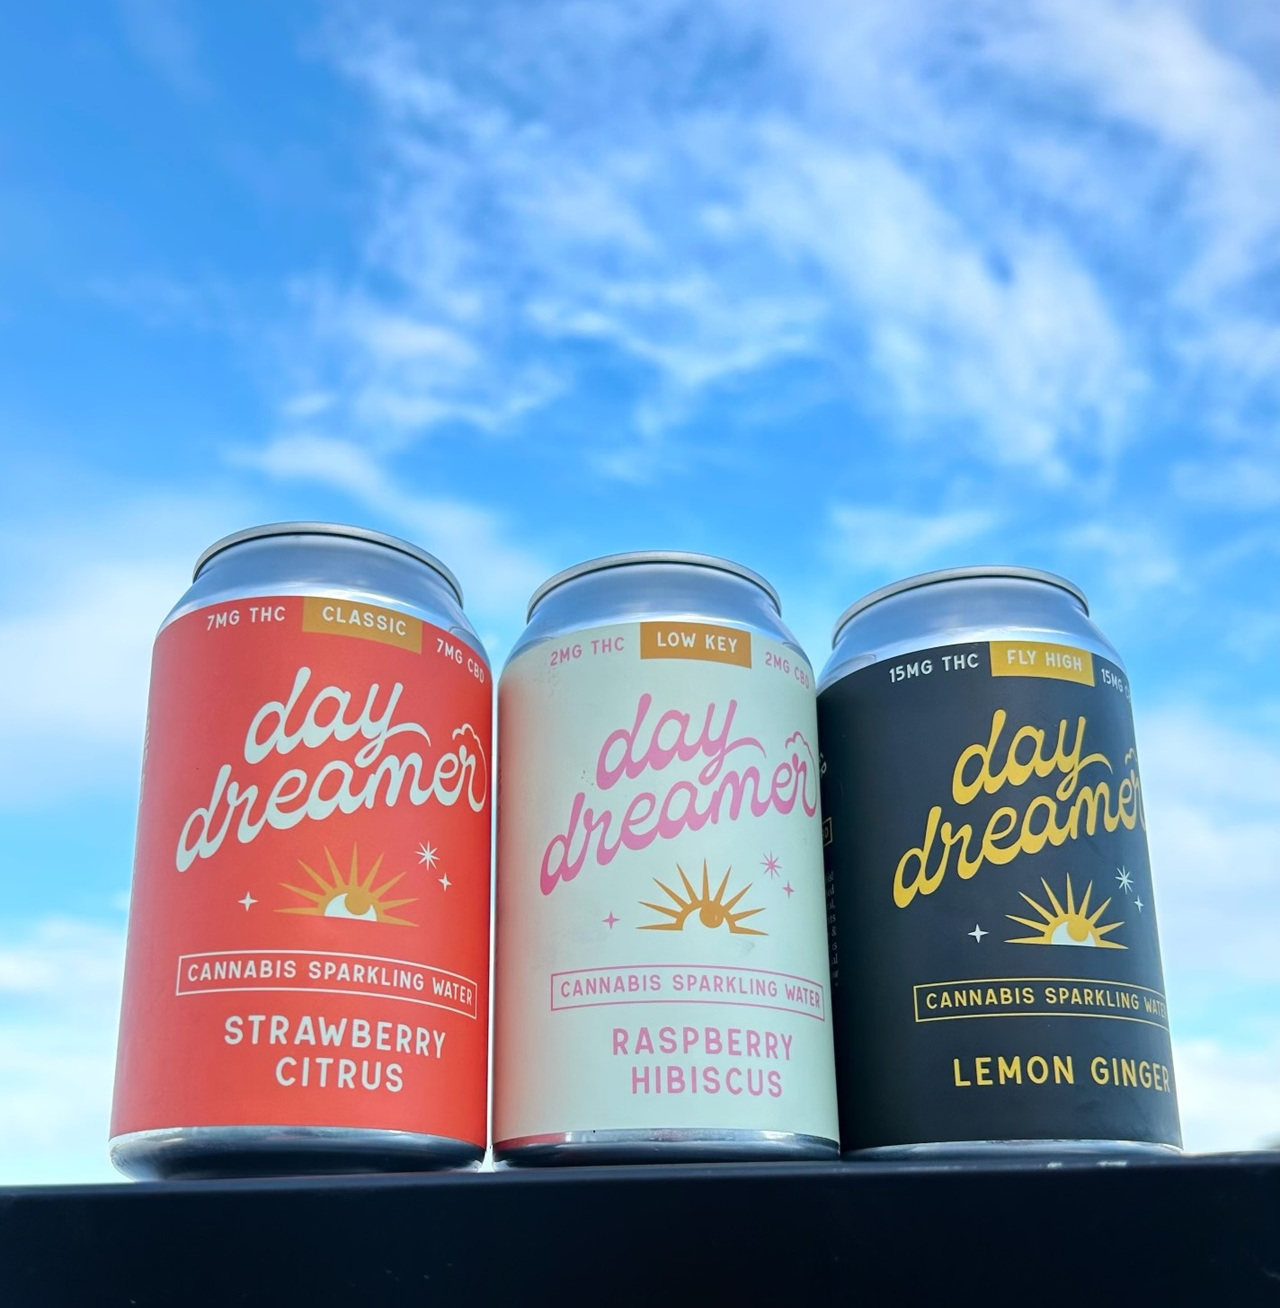 Field Day Brewing's cannabis-infused sparkling beverage, Day Dreamer, makes its debut Feb. 23.